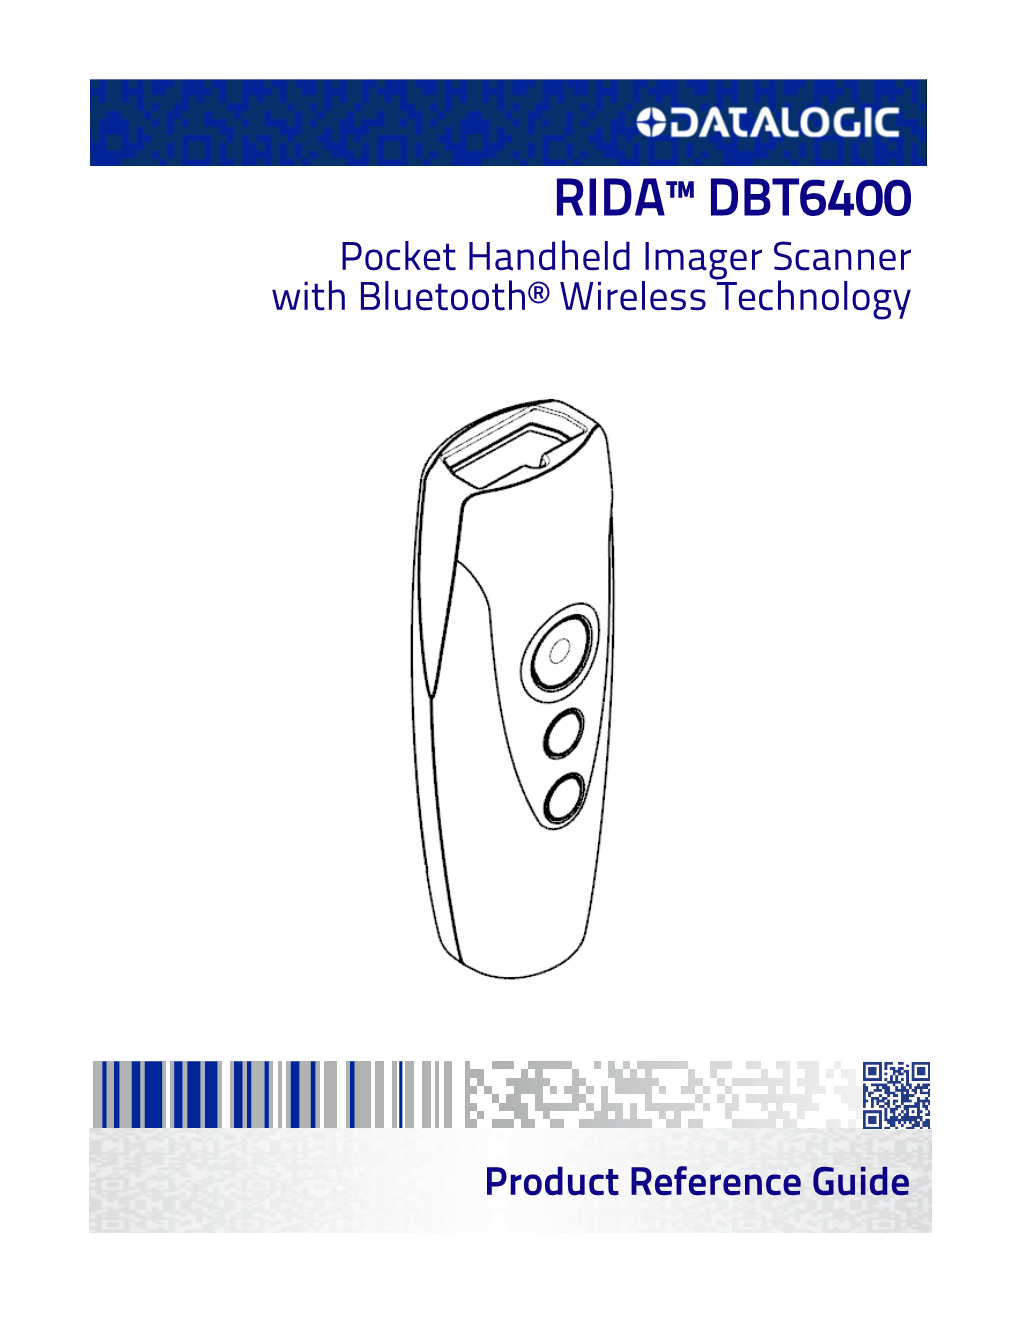 RIDA™ DBT6400 Pocket Handheld Imager Scanner with Bluetooth® Wireless Technology